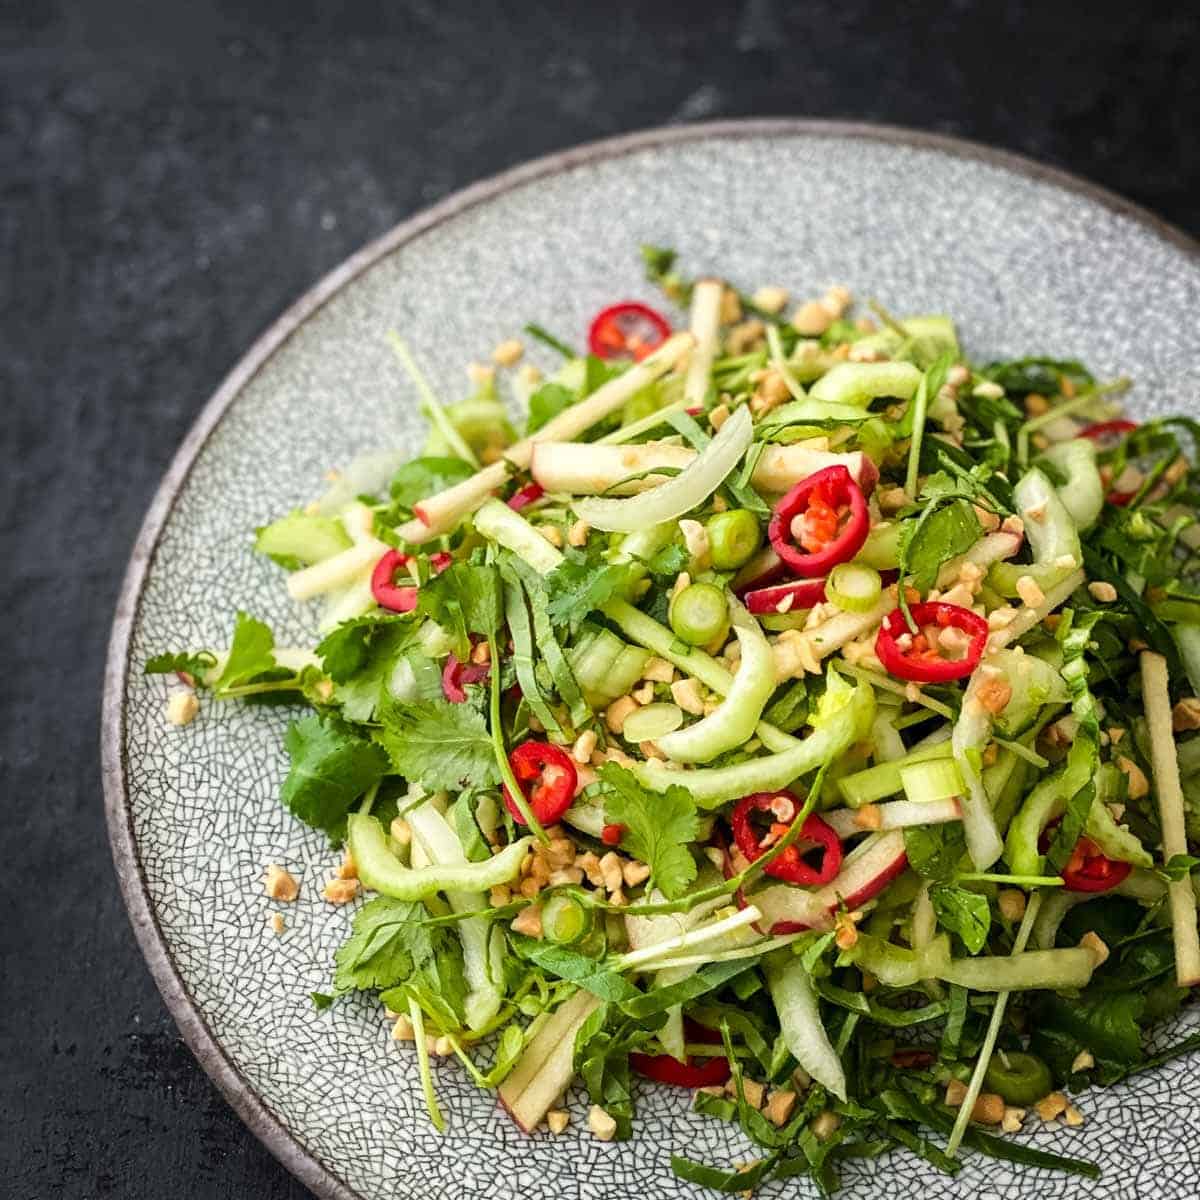 Pak Choy Salad with Coriander Lime Dressing